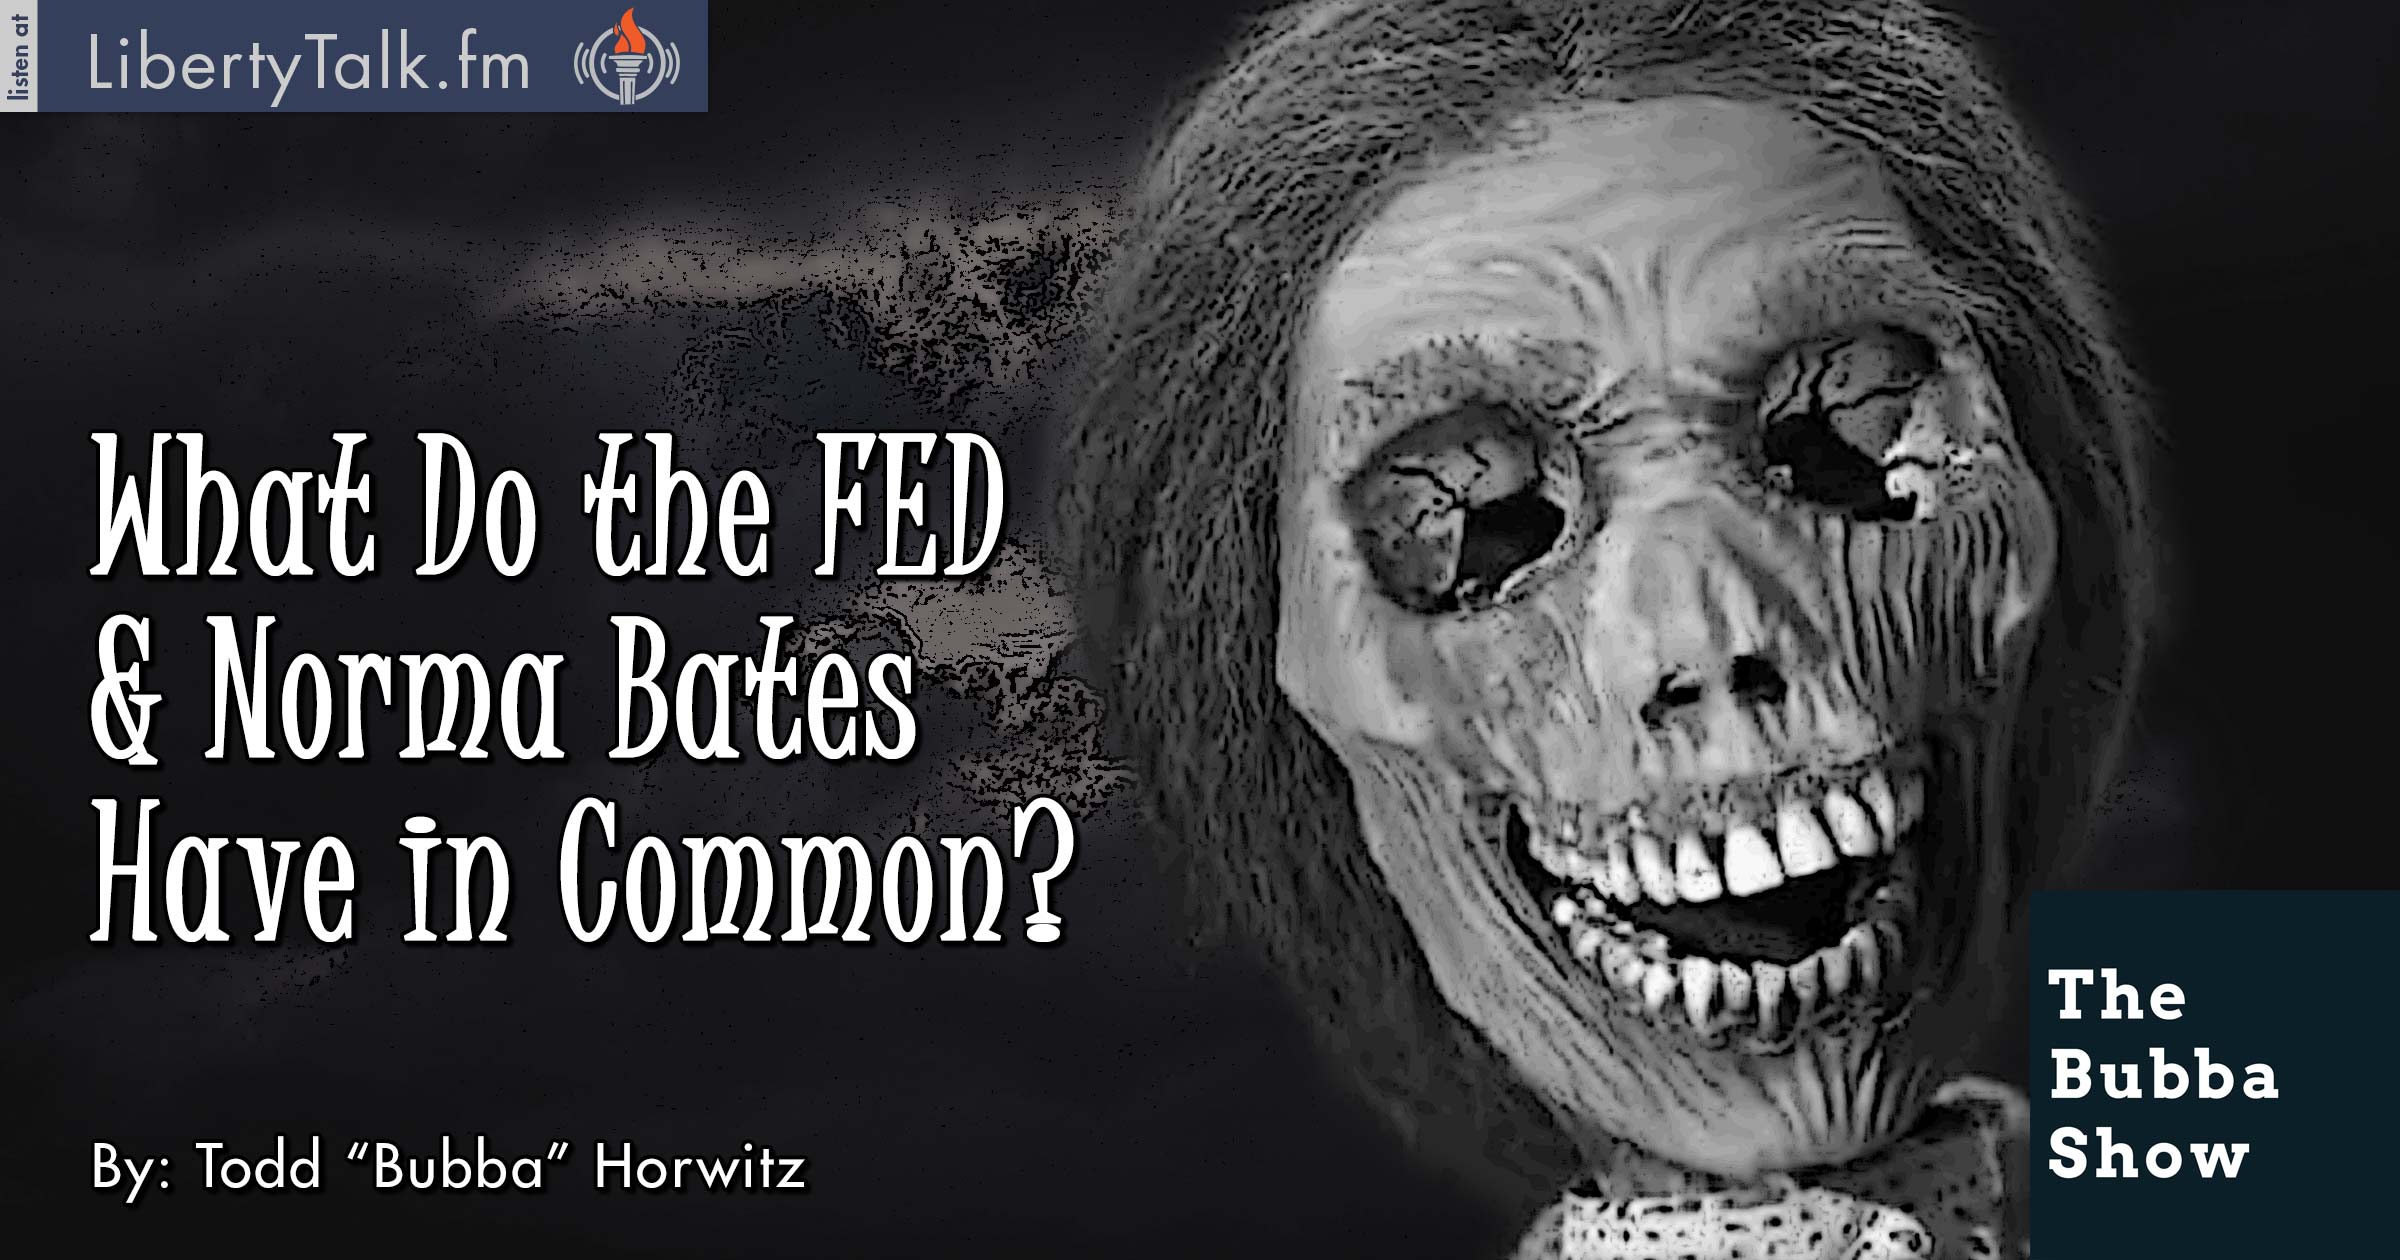 What Do the FED and Norma Bates Have in Common? - The Bubba Show